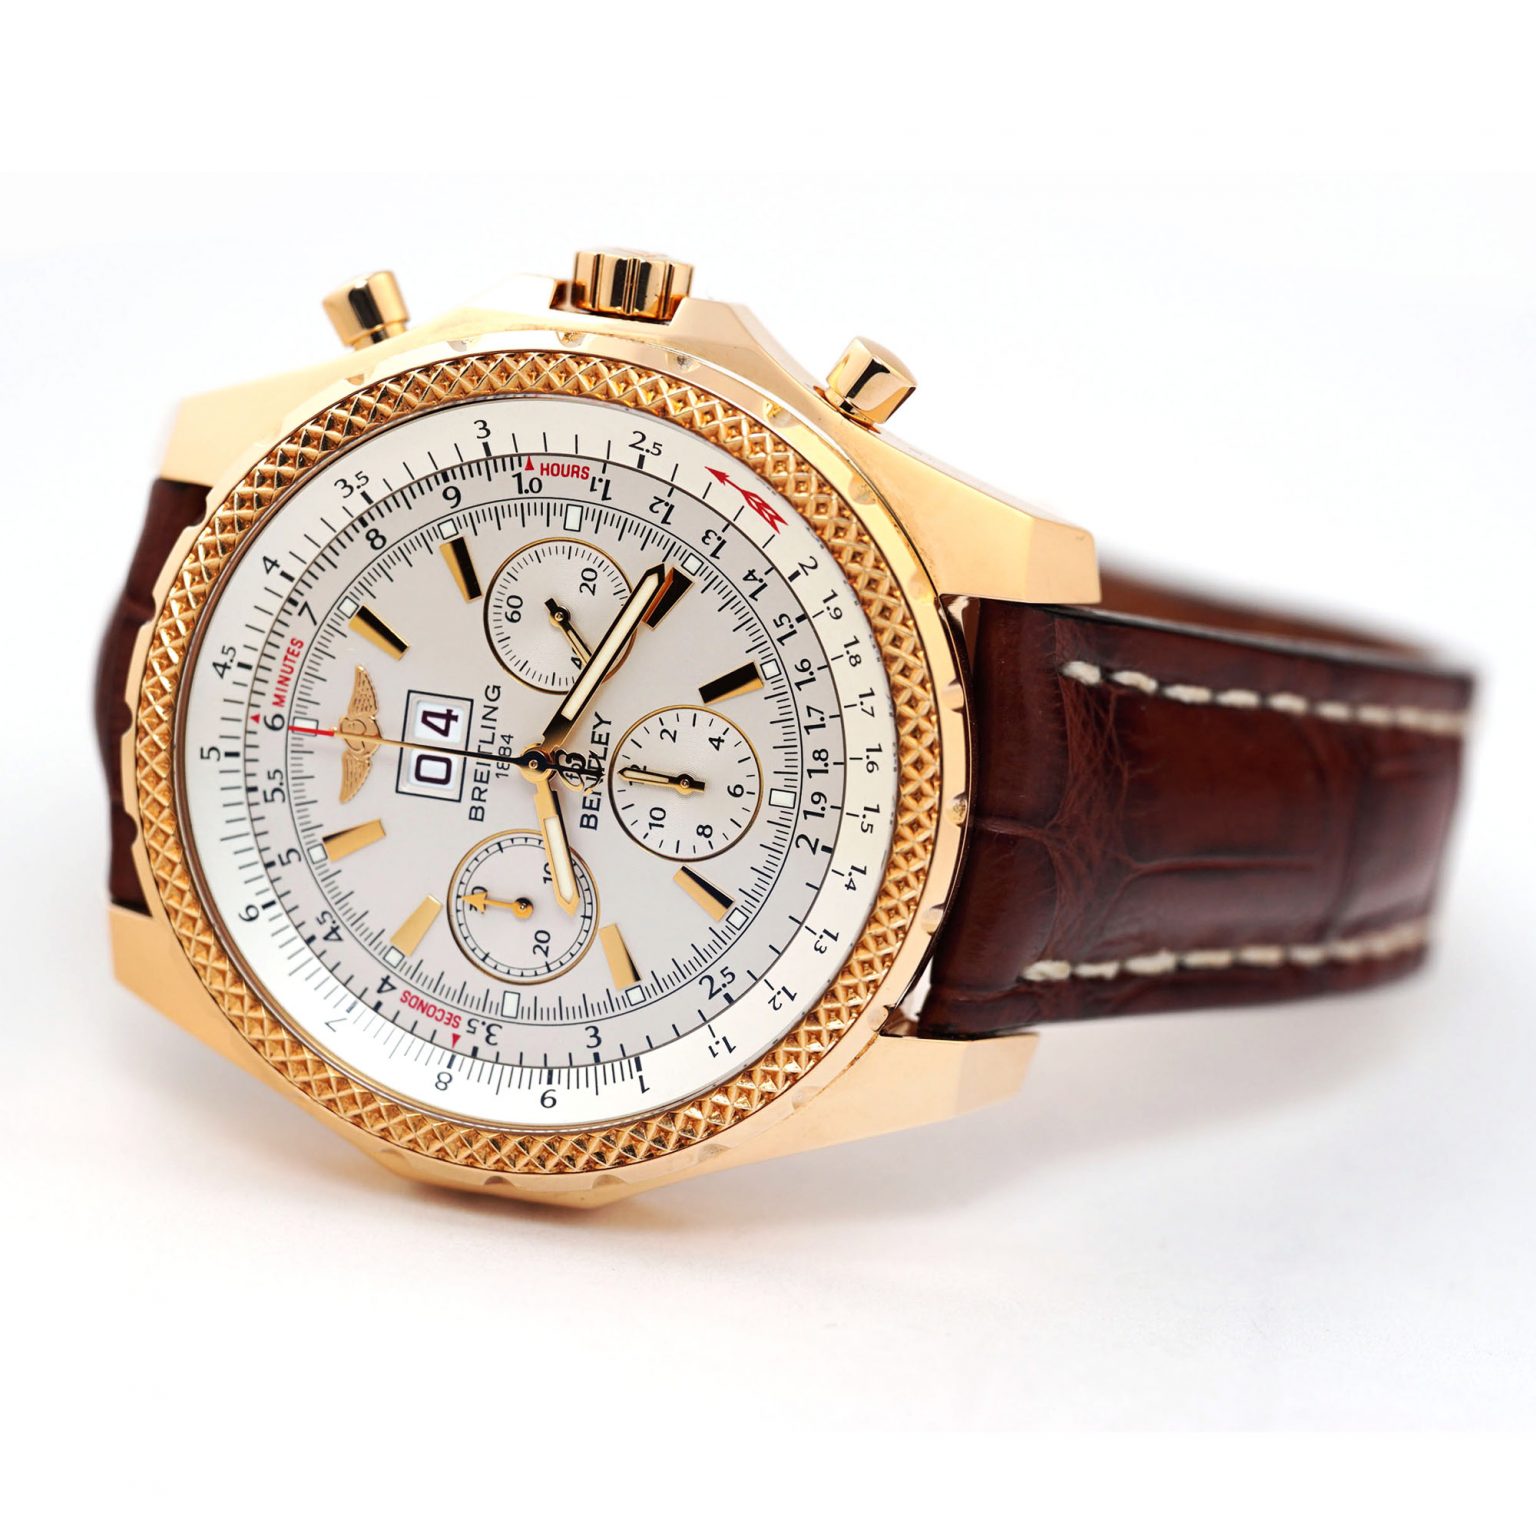 Breitling for Bentley 6.75 Chronograph Watch K44362 for $14,000 • Black ...